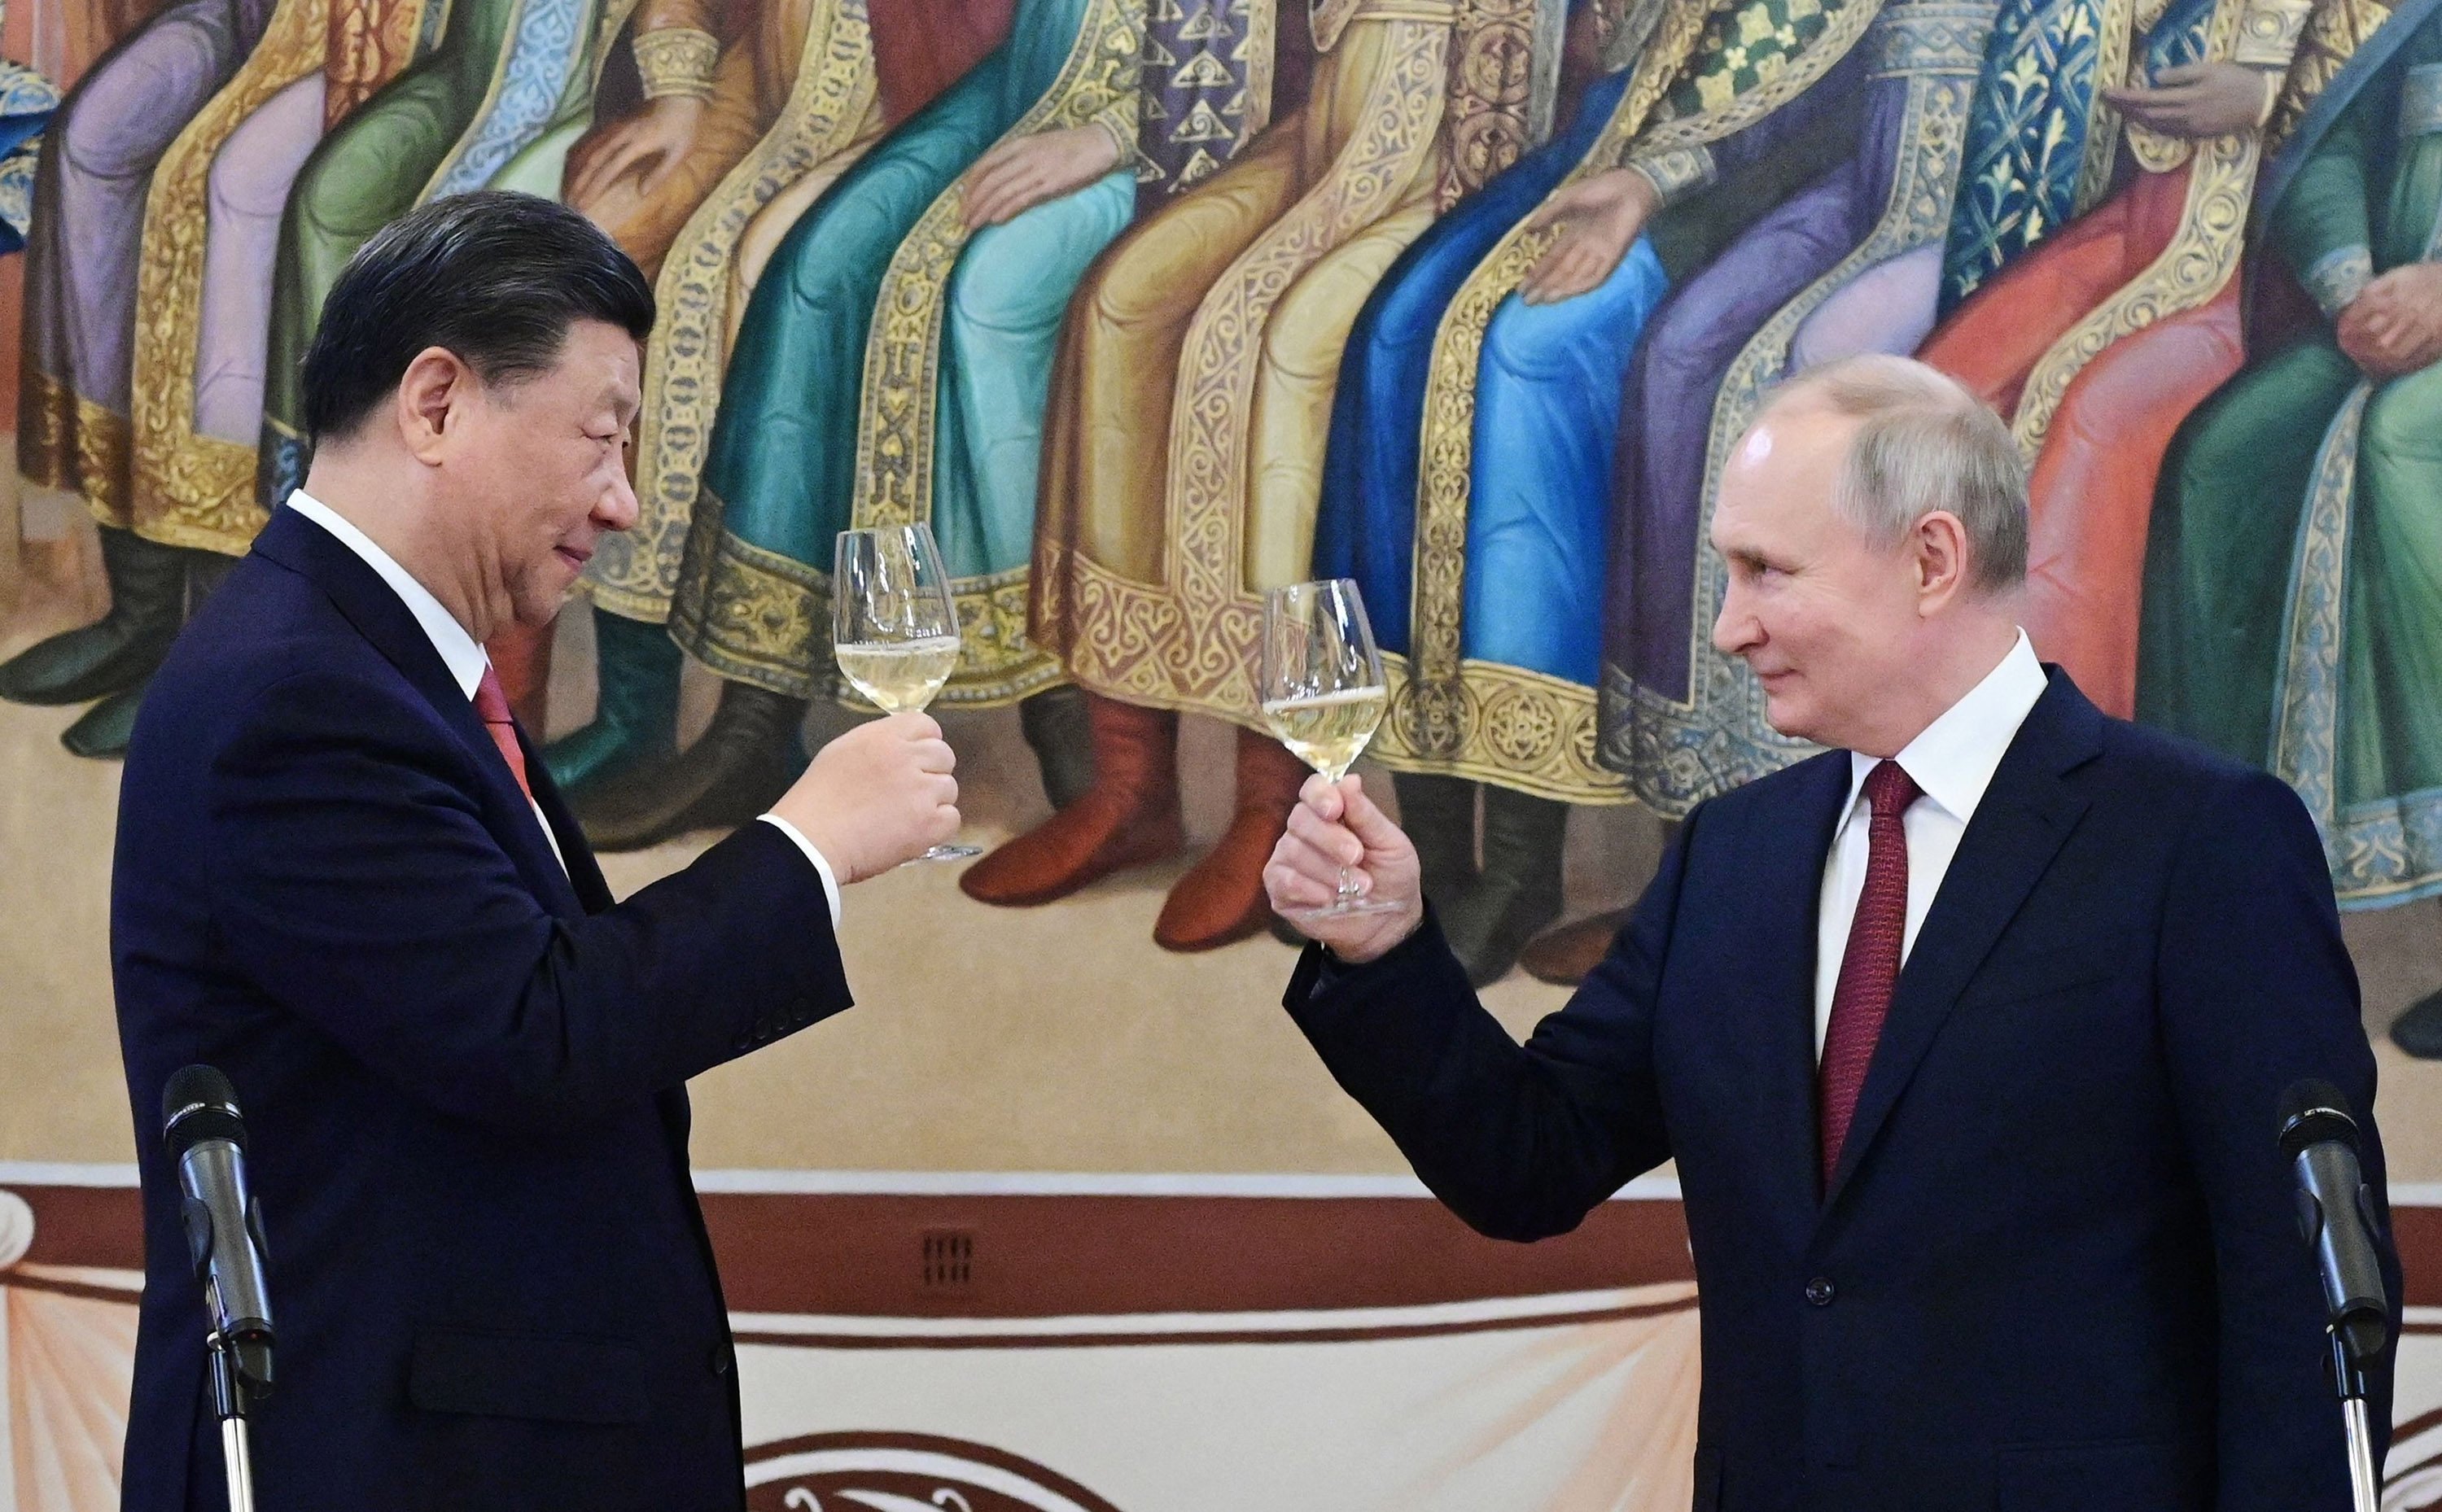 Chinese President Xi Jinping and Russian President Vladimir Putin make a toast following their talks in Moscow on March 21 last year. Photo: AFP/Getty Images/TNS